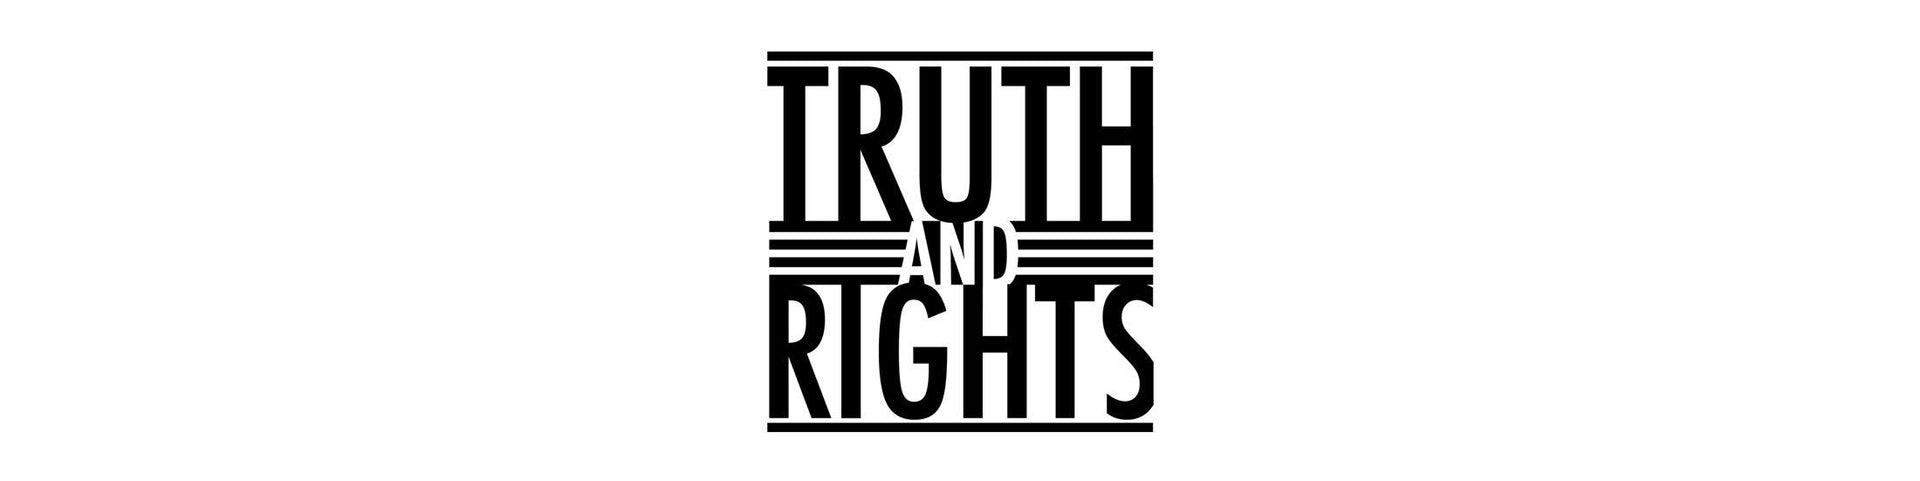 Shop – Truth and Rights – Band & Music Merch – Cold Cuts Merch